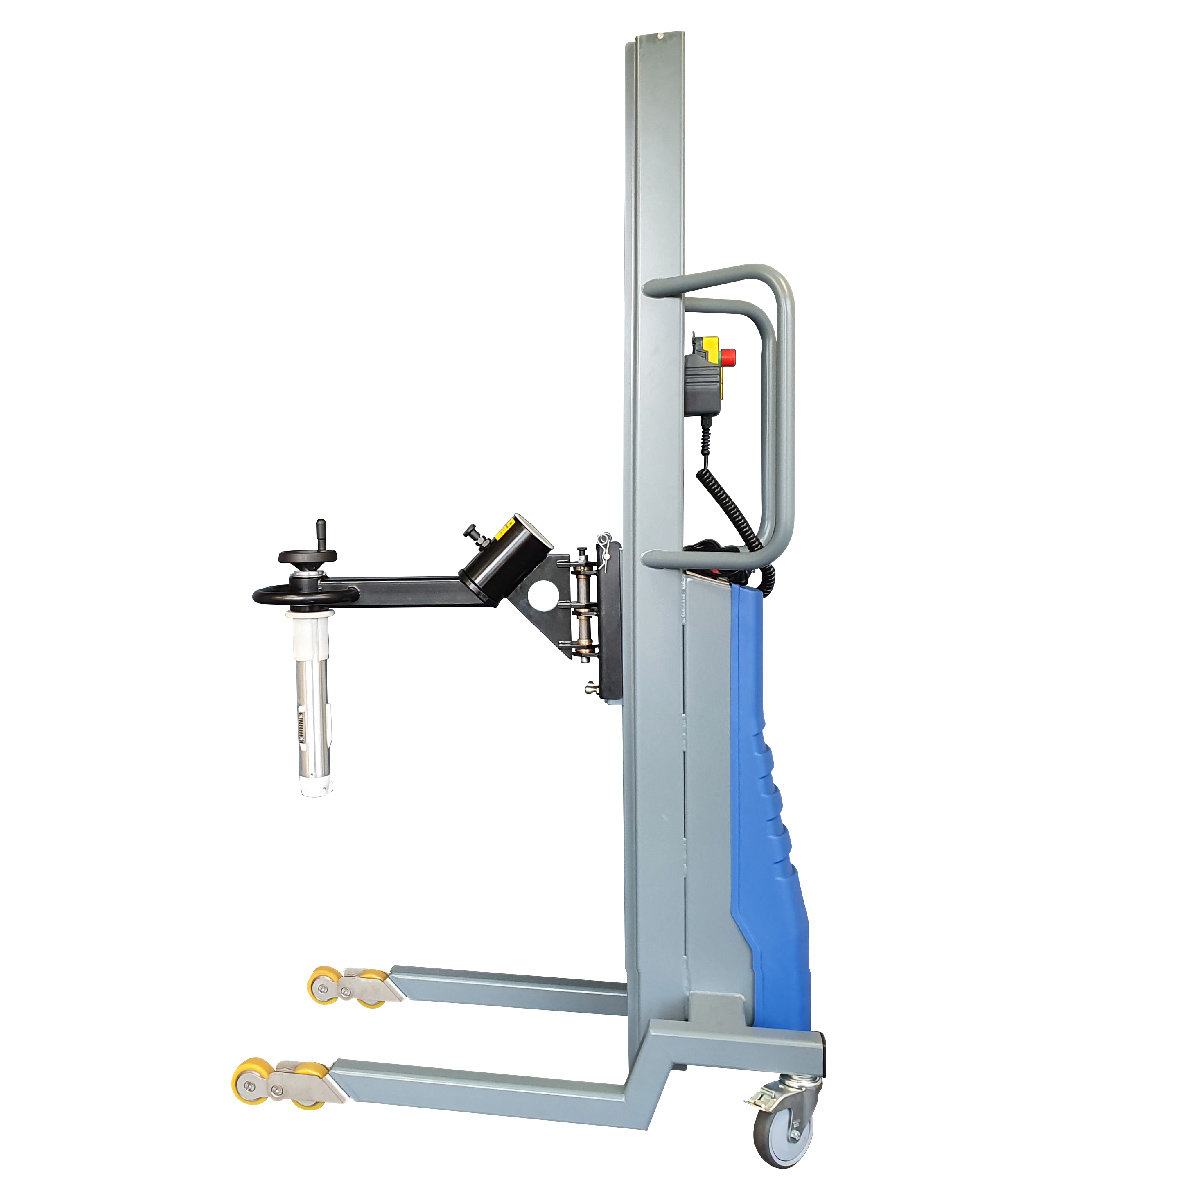 Buy Electric Core Grip Roll Lifter in Roll Lifters from Astrolift NZ